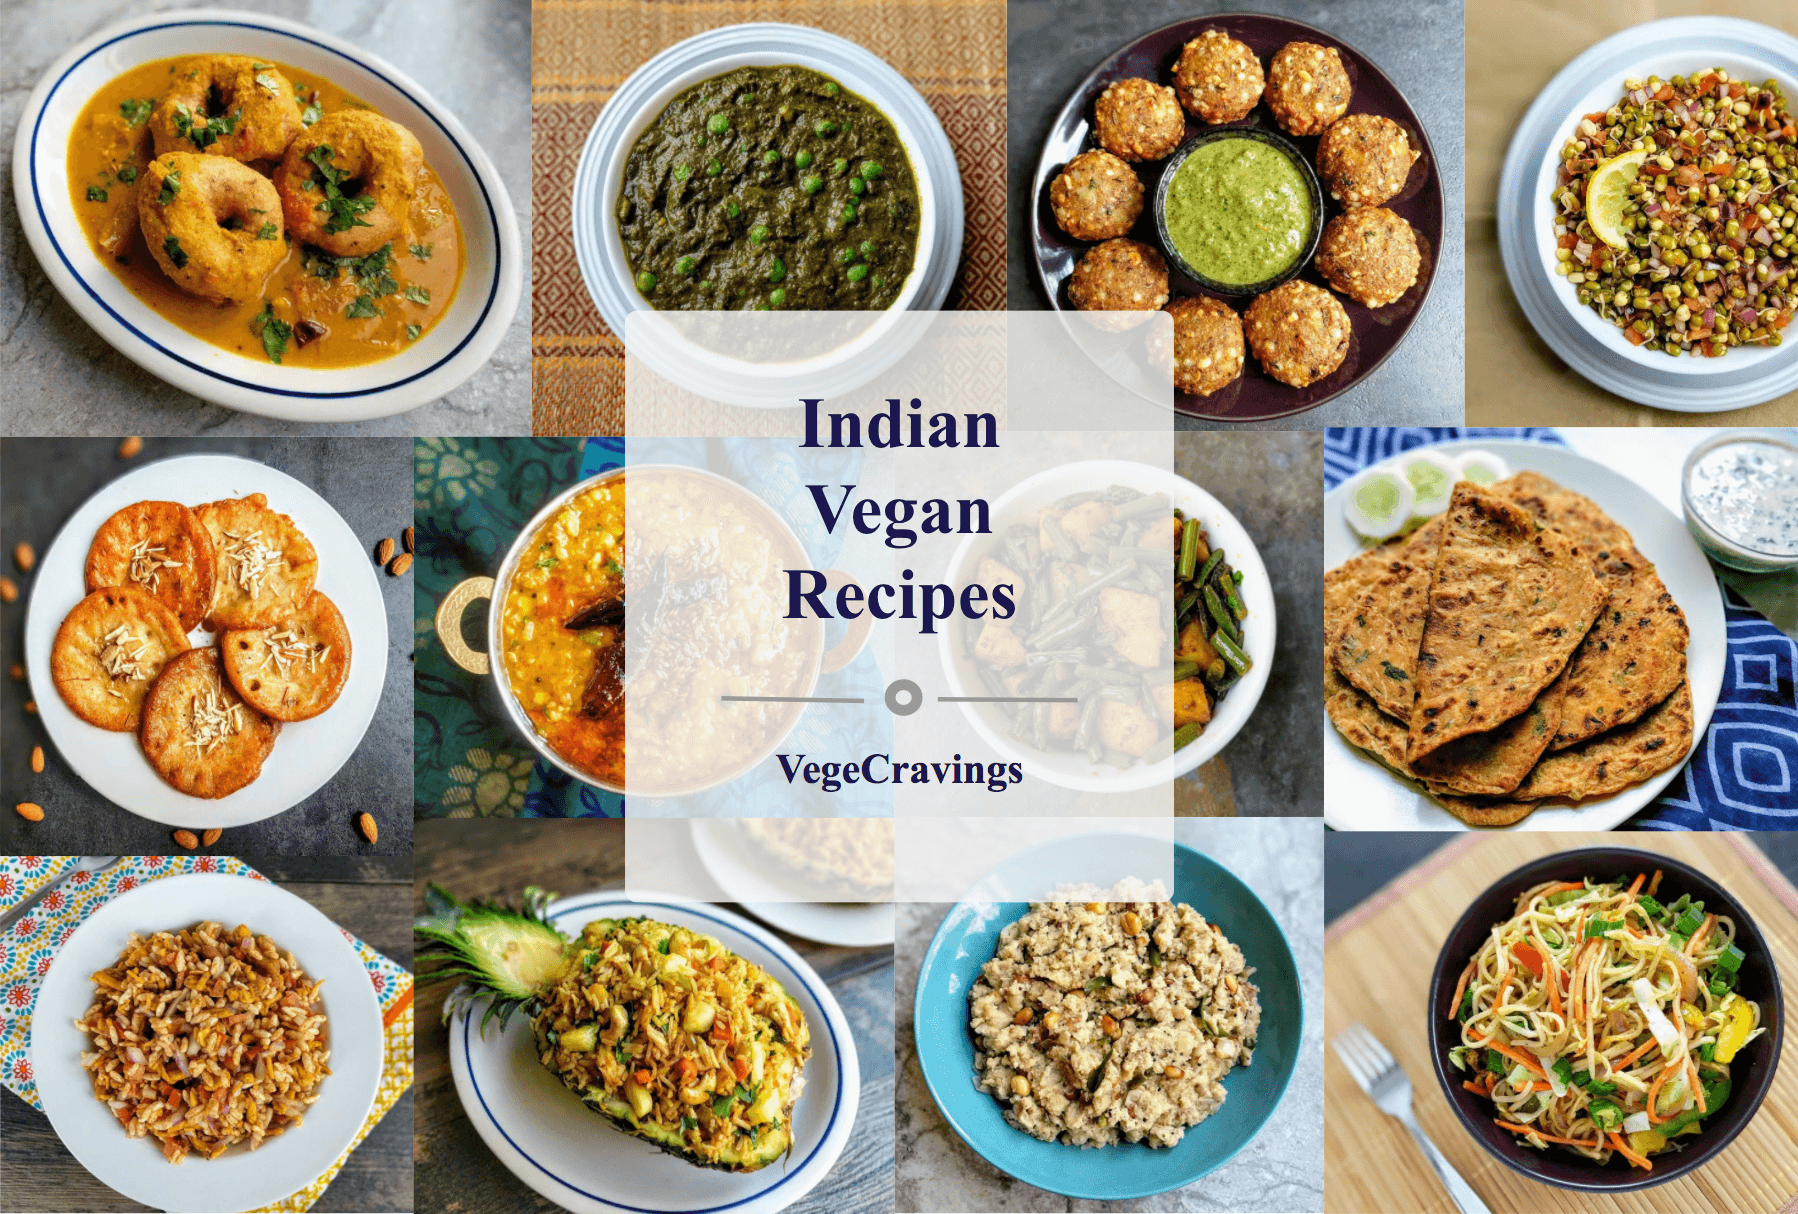 A list of popular Indian vegan recipes, including a variety of delicious snacks, curries, rice, breads, salads and desserts.